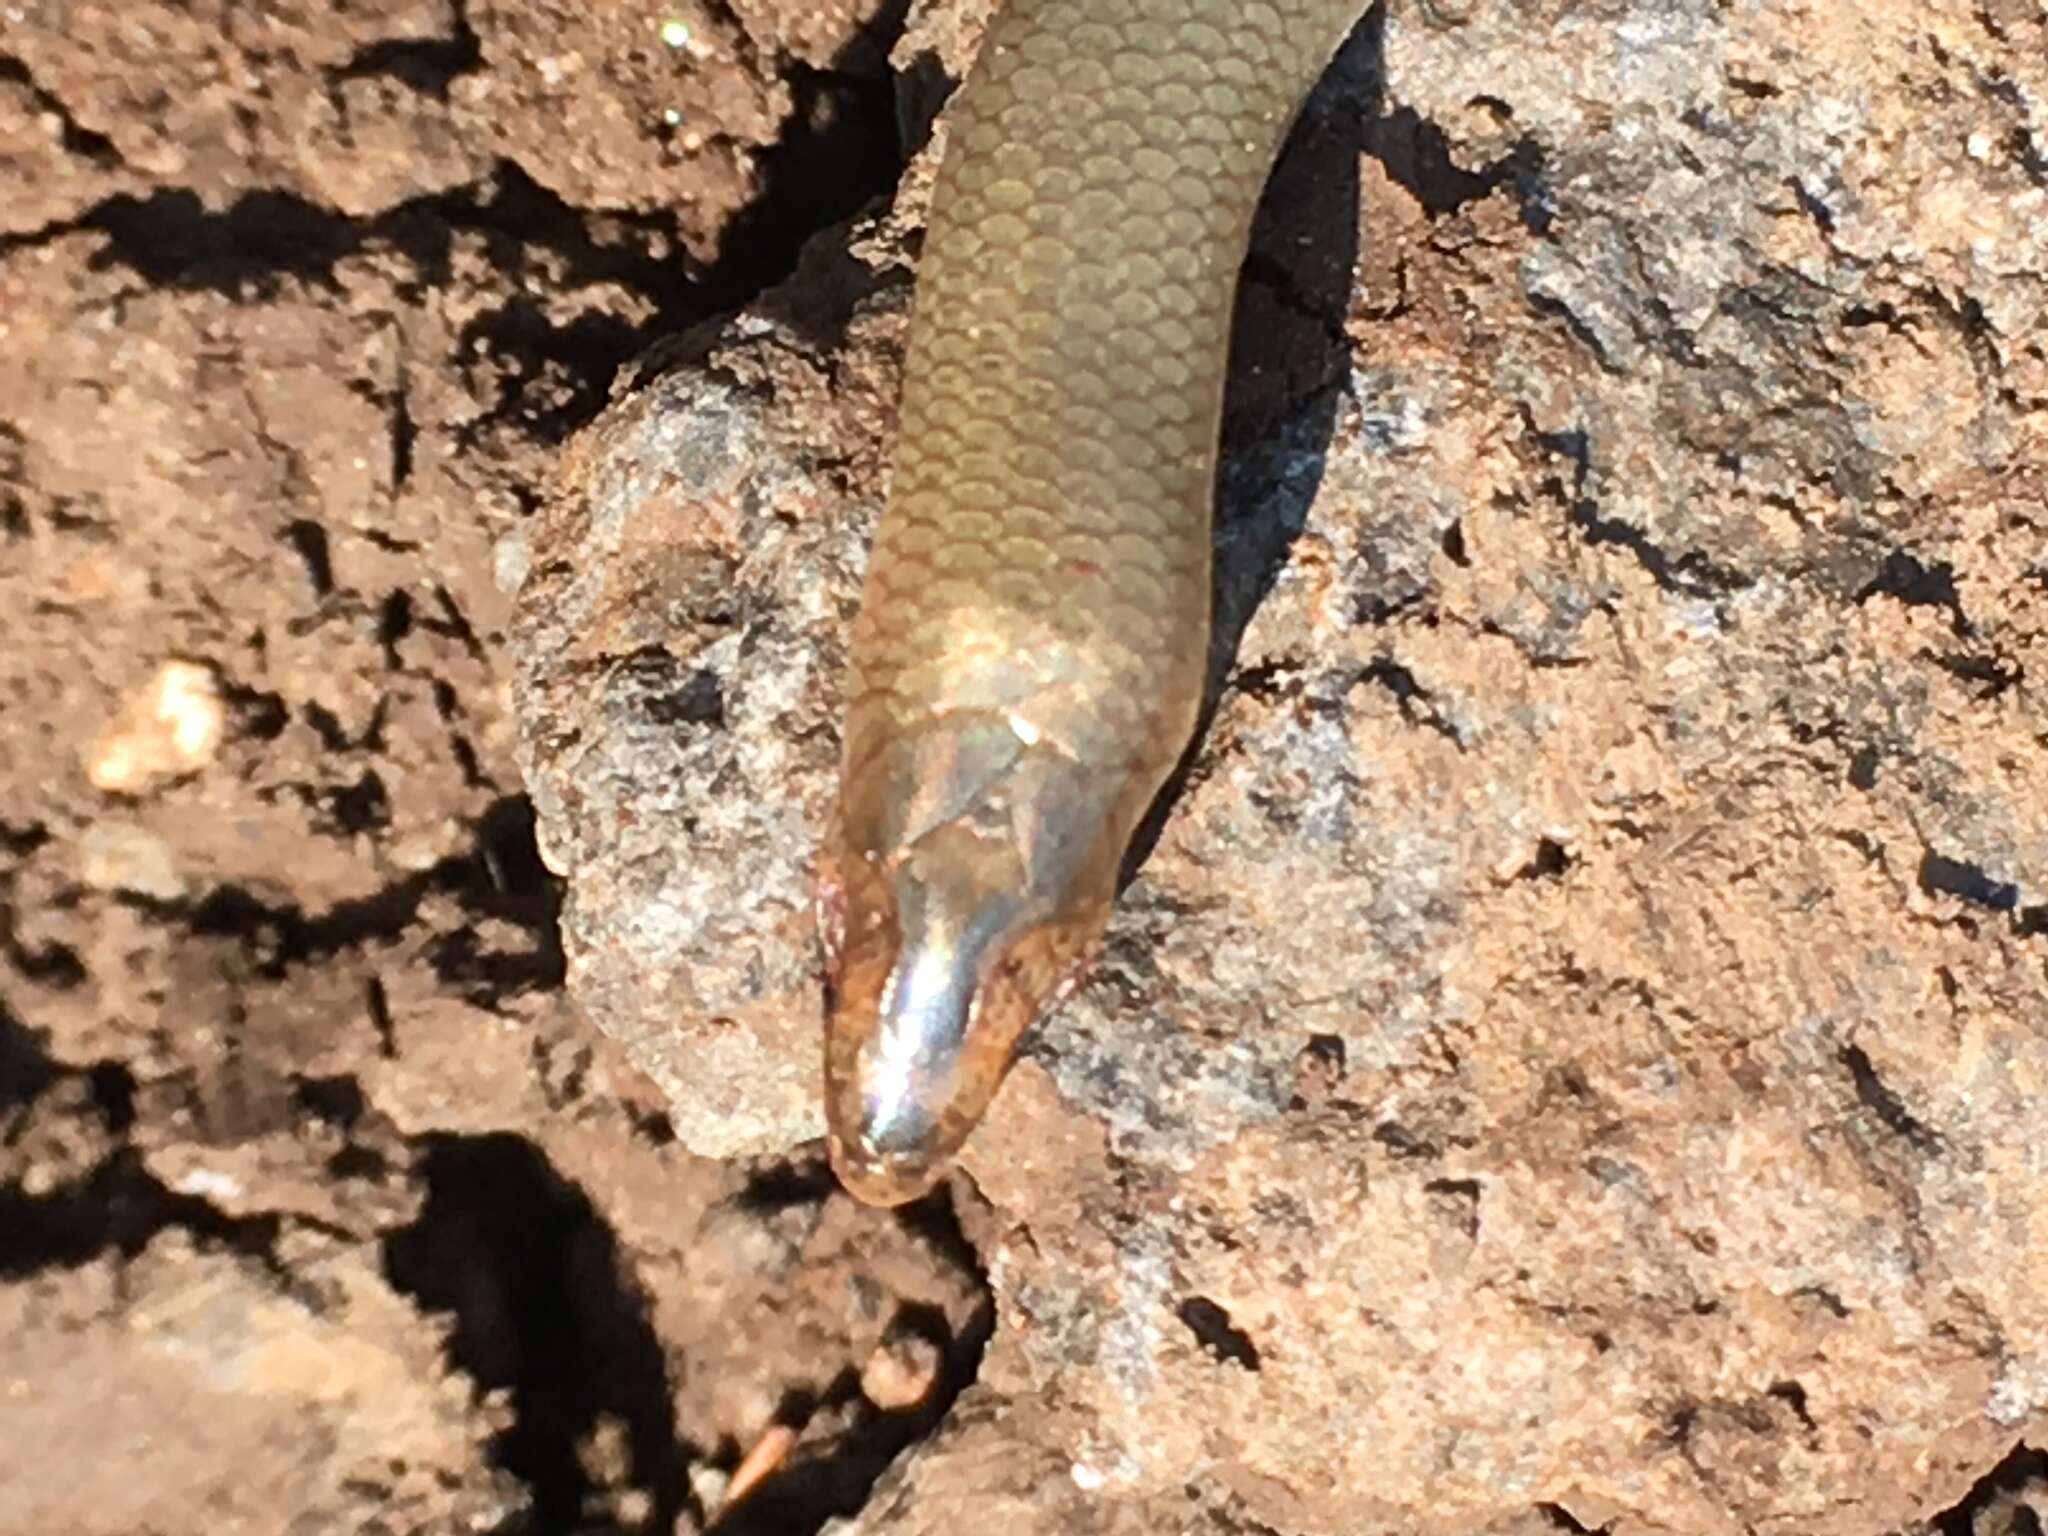 Image of Günther's Cylindrical Skink